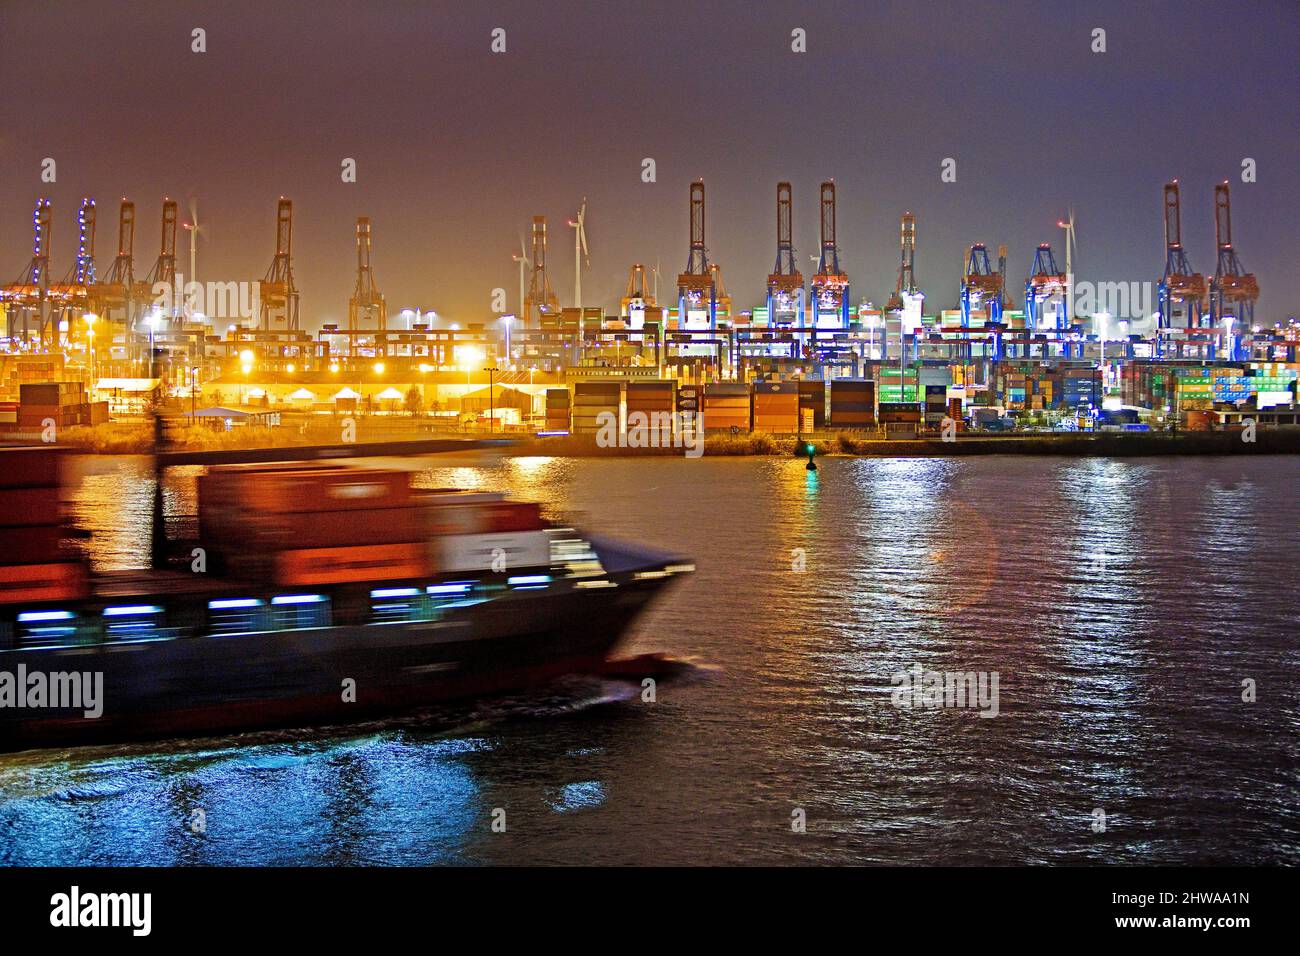 Container ship on Norderelbe in front of cranes at container terminal Burchardkai at night, Port of Hamburg, Germany, Hamburg Stock Photo